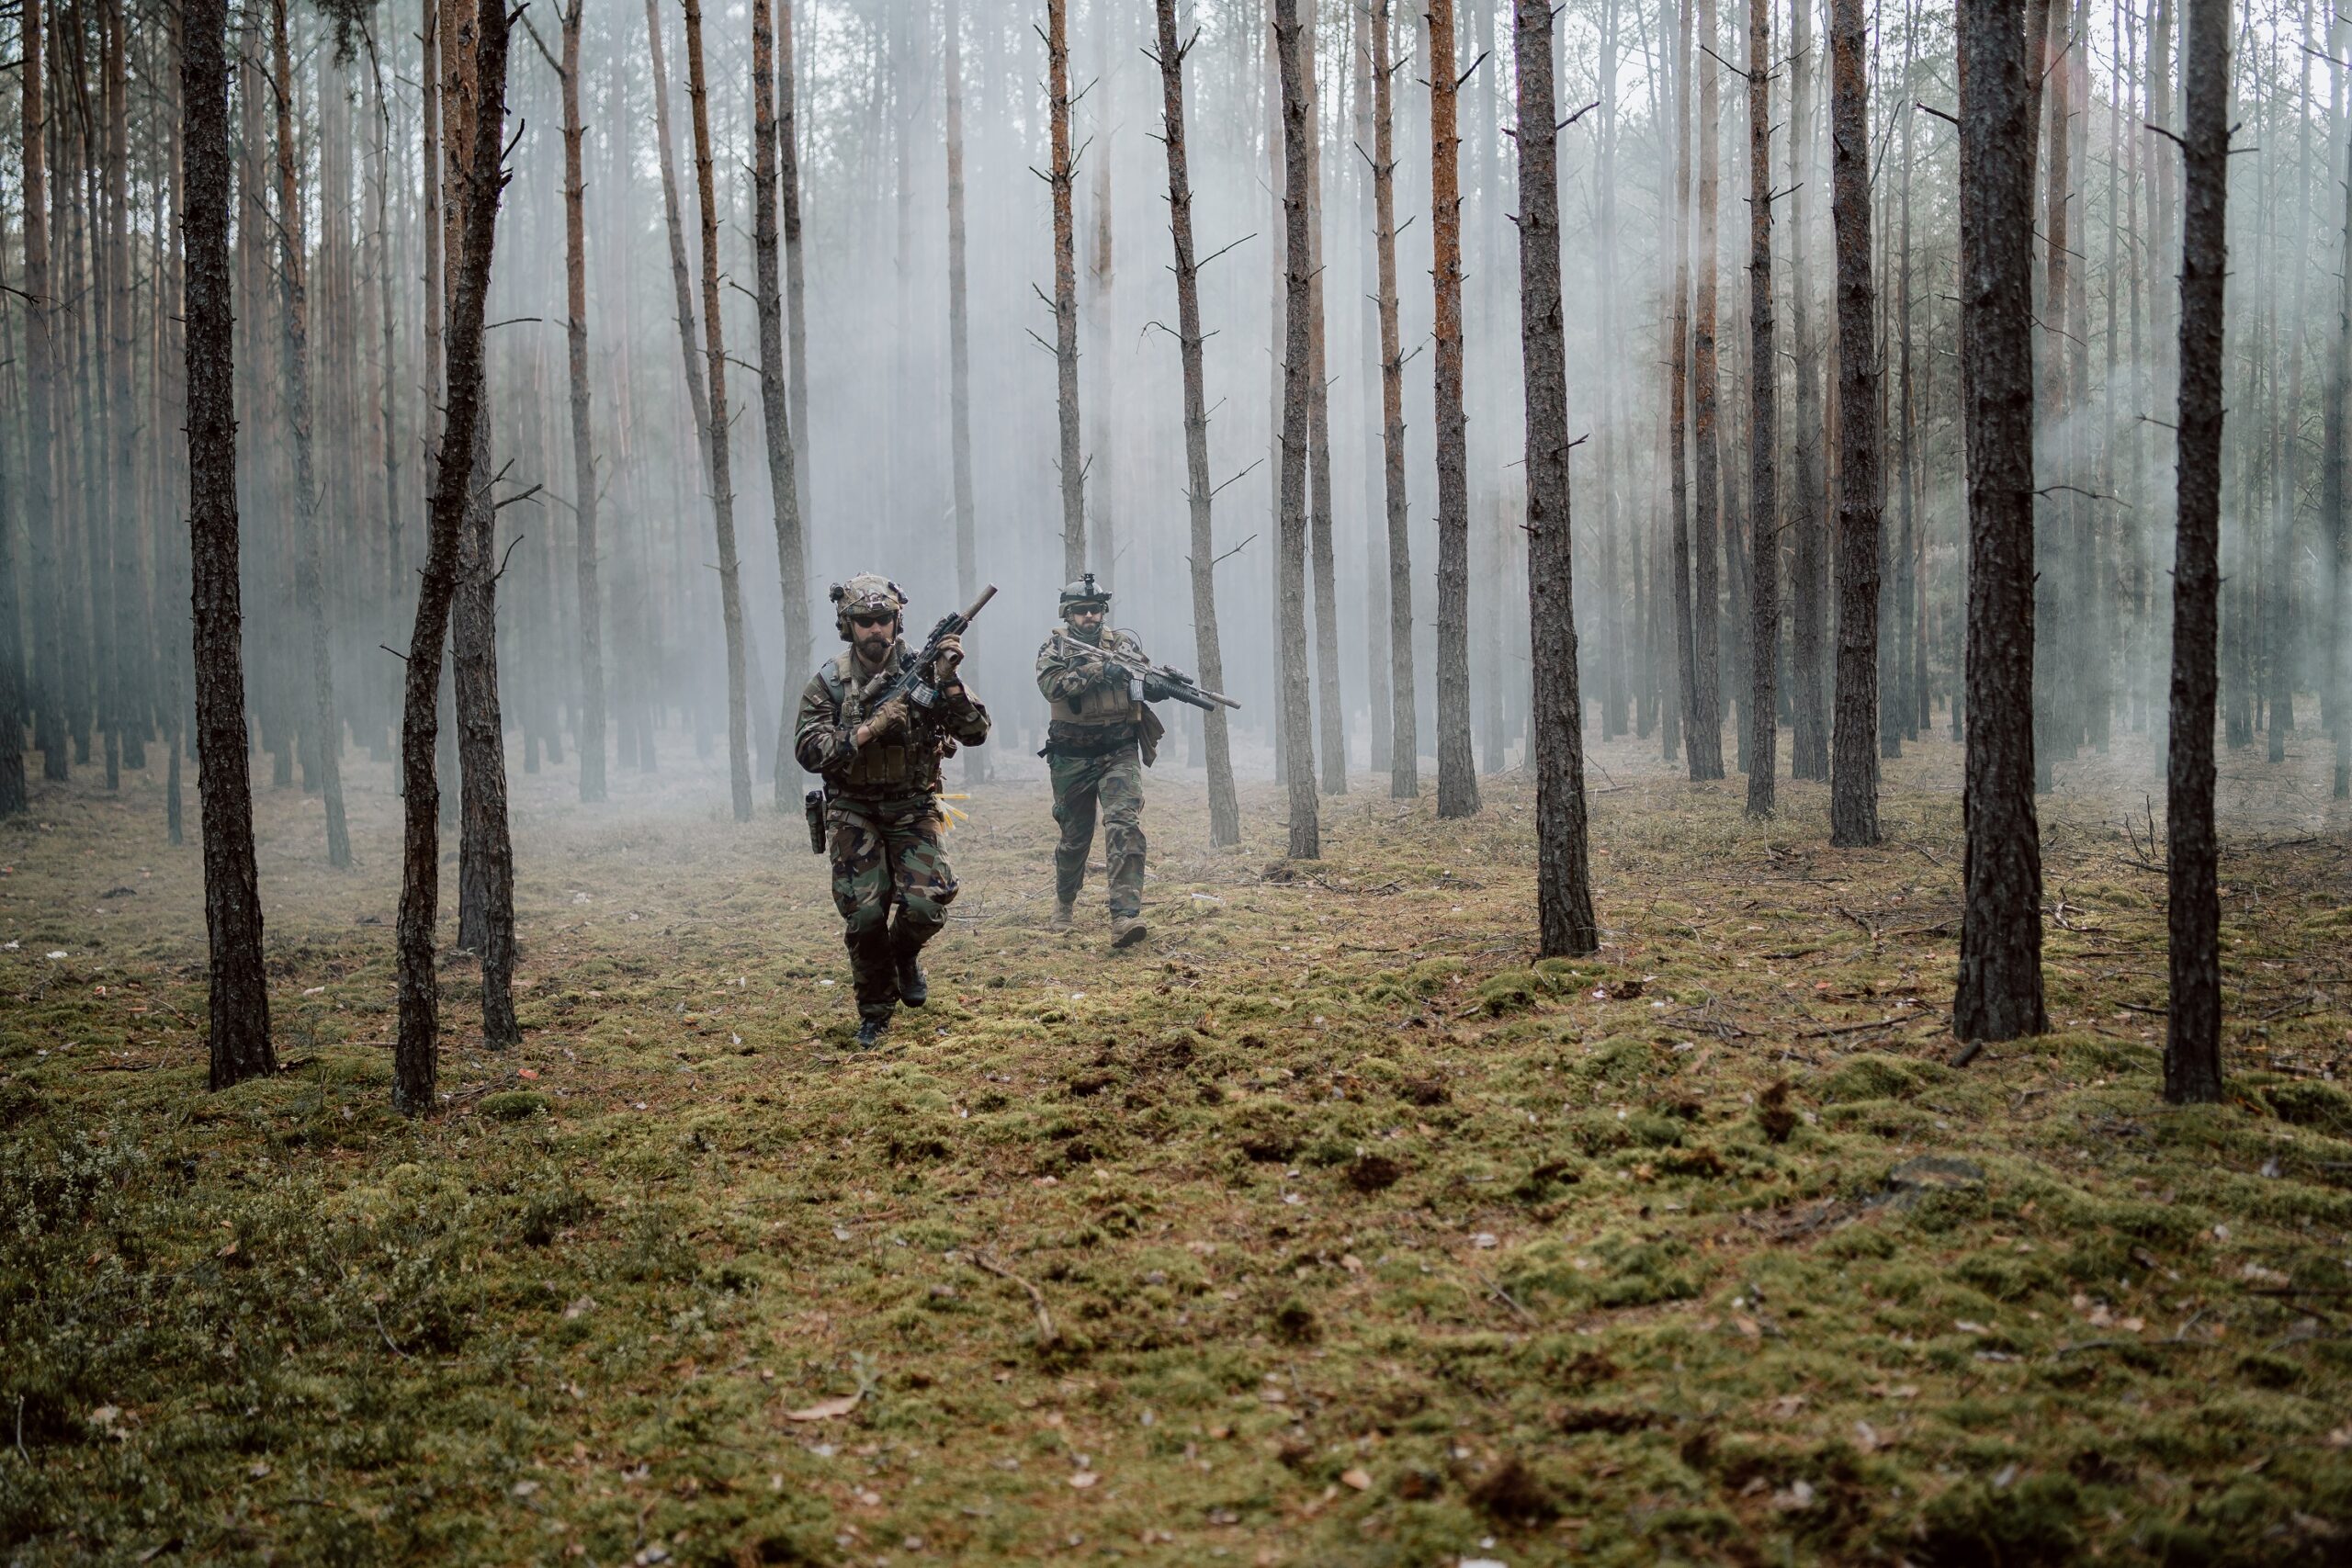 Squad of Four Fully Equipped Soldiers in Camouflage on a Reconnaissance Military Mission, Rifles Ready to Shoot. They’re Moving in Formation Through Dense Cold Forest.